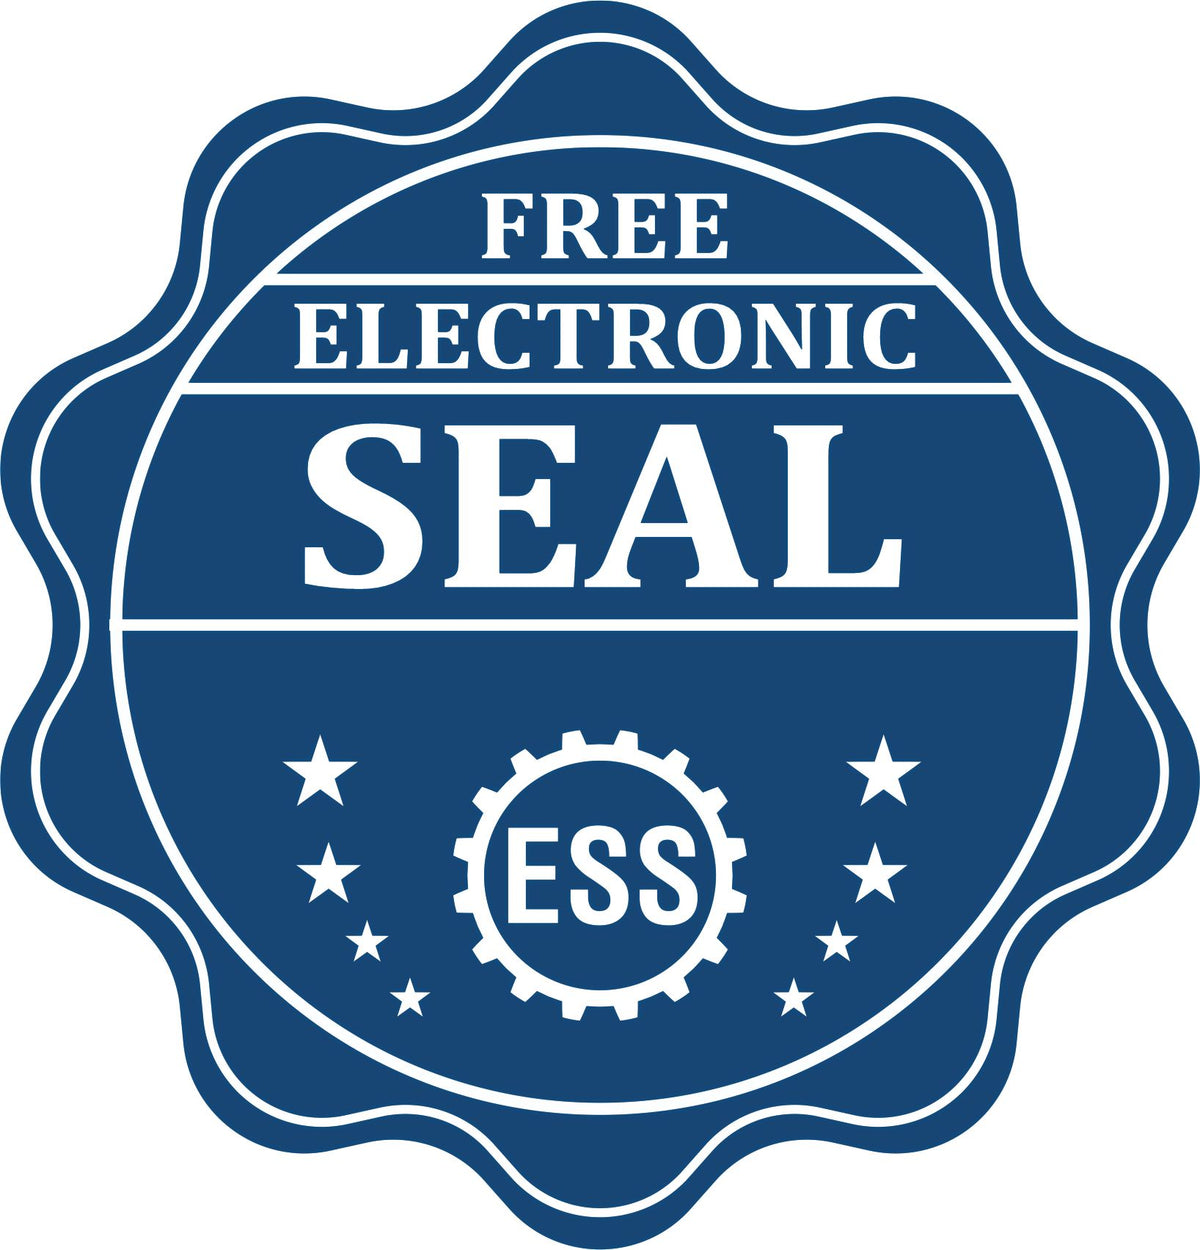 A badge showing a free electronic seal for the Slim Pre-Inked Indiana Landscape Architect Seal Stamp with stars and the ESS gear on the emblem.